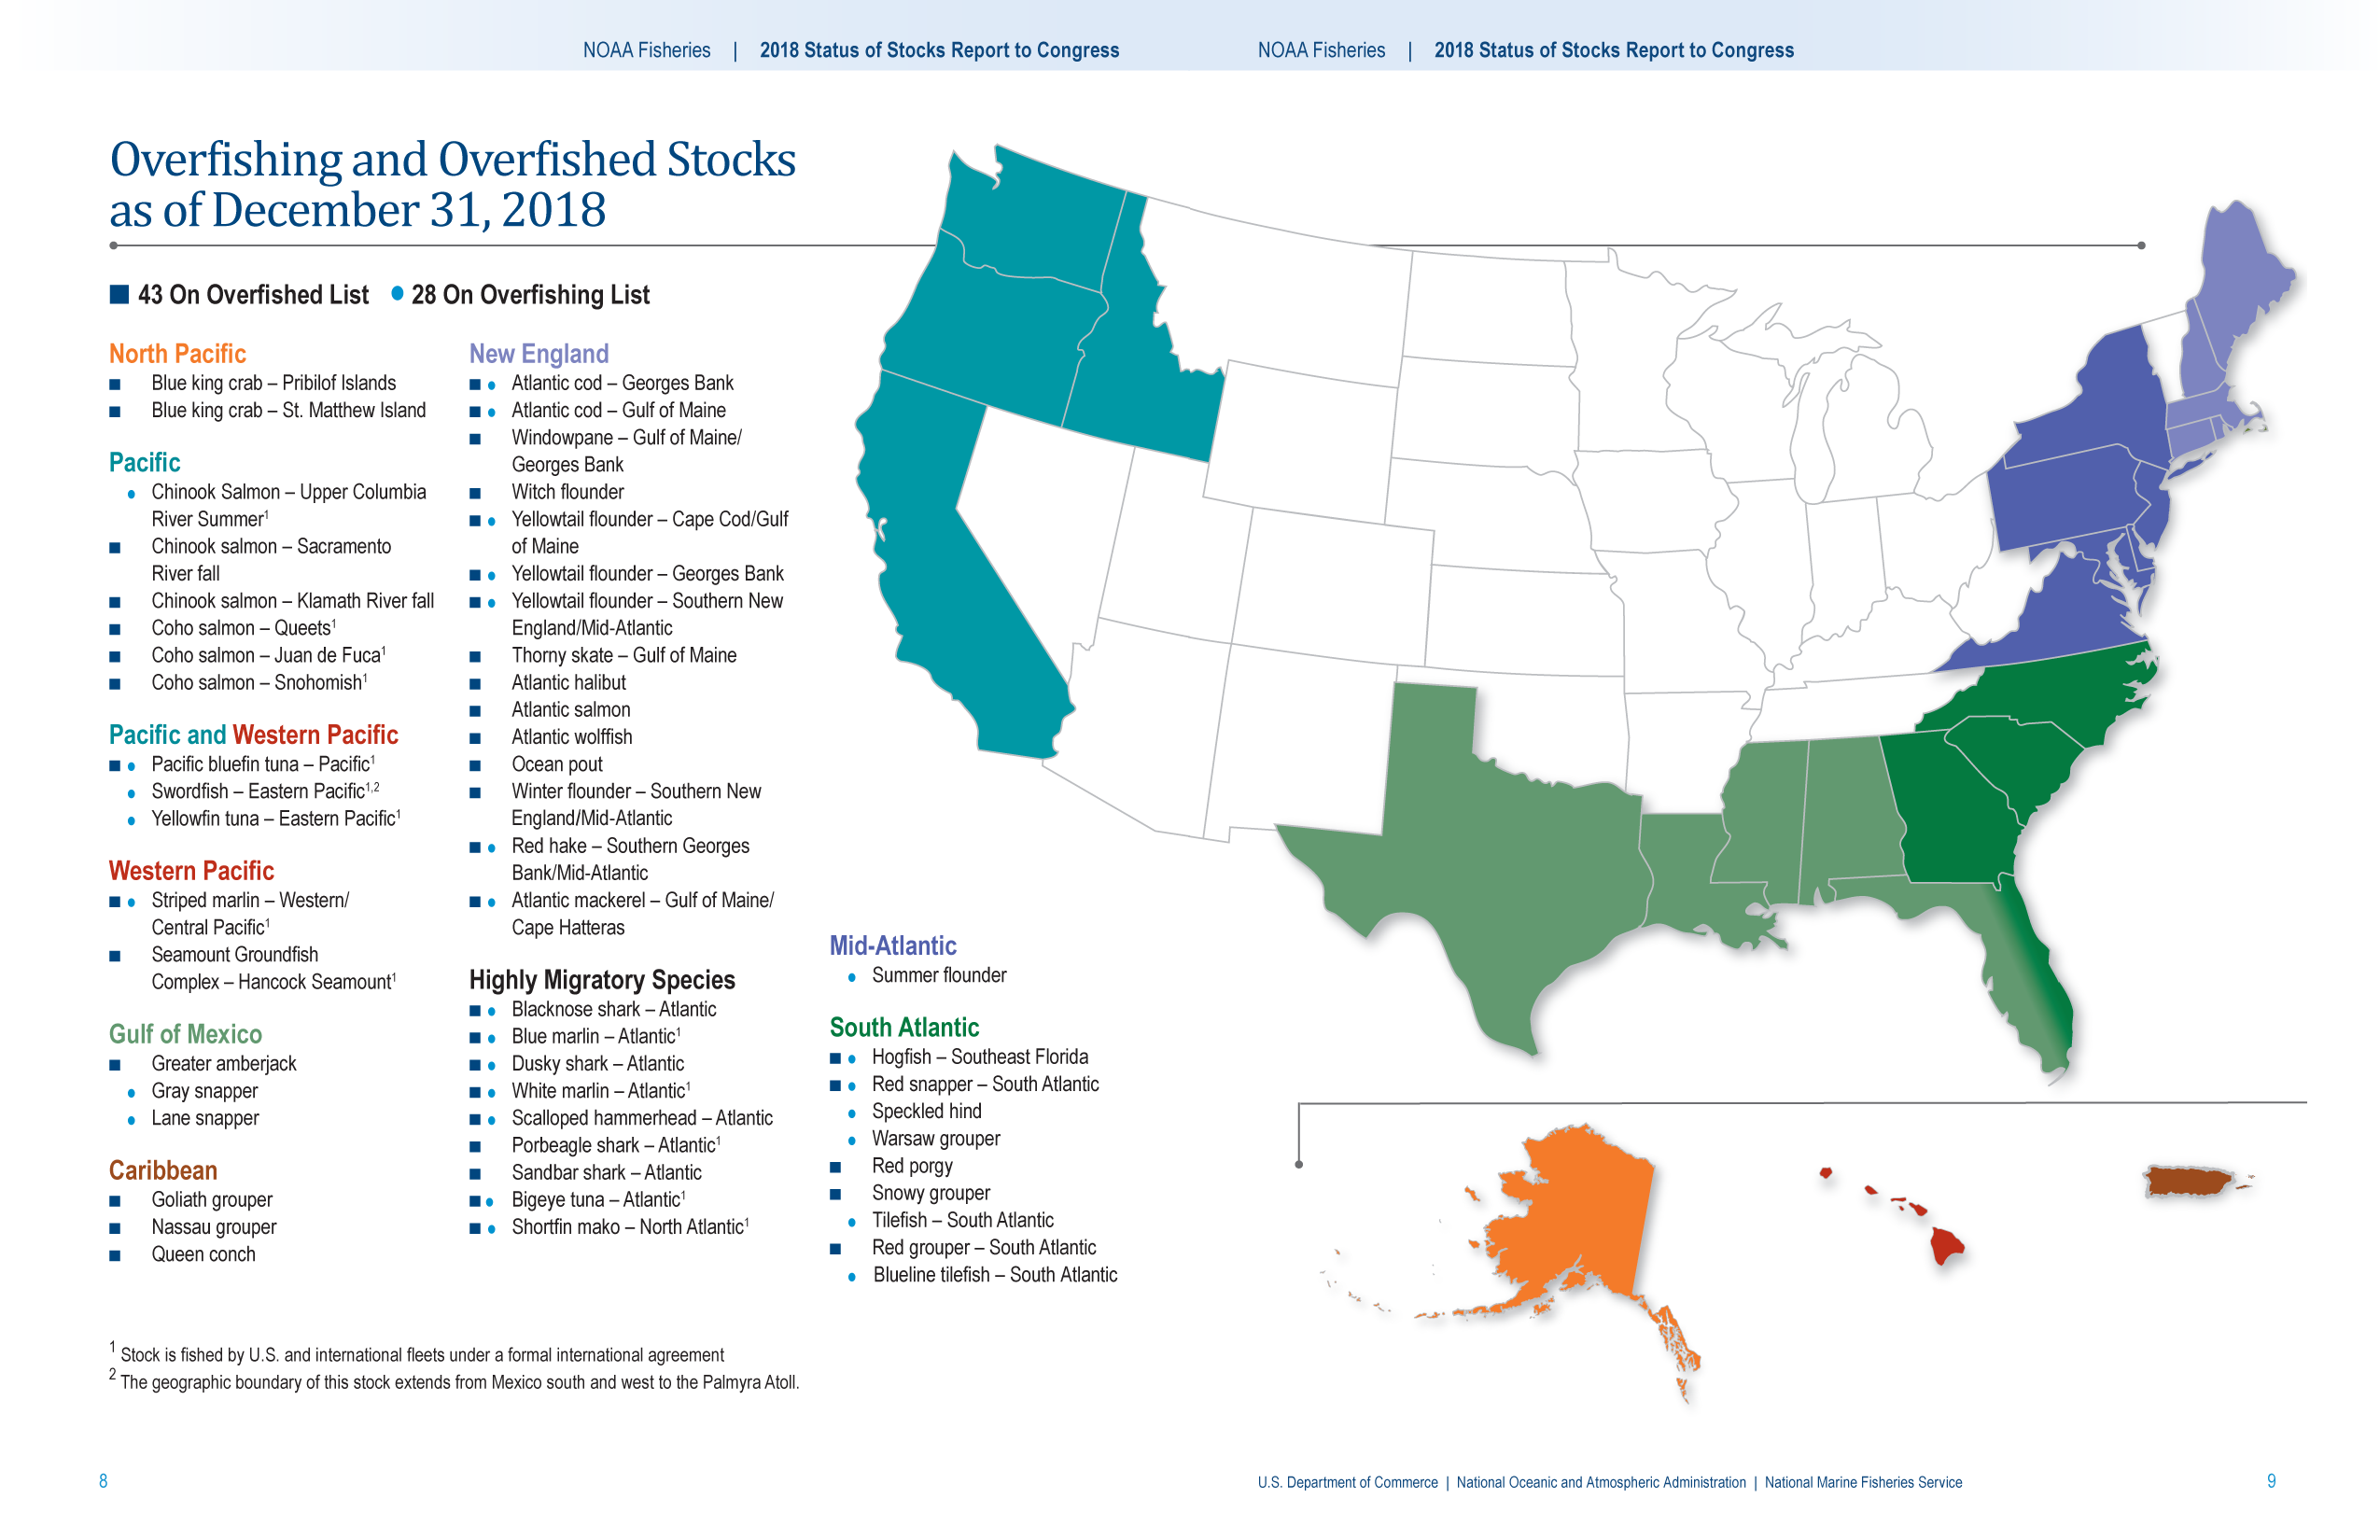 Overfishing & Overfished Stocks as of December 31, 2018 (Click image for larger version)